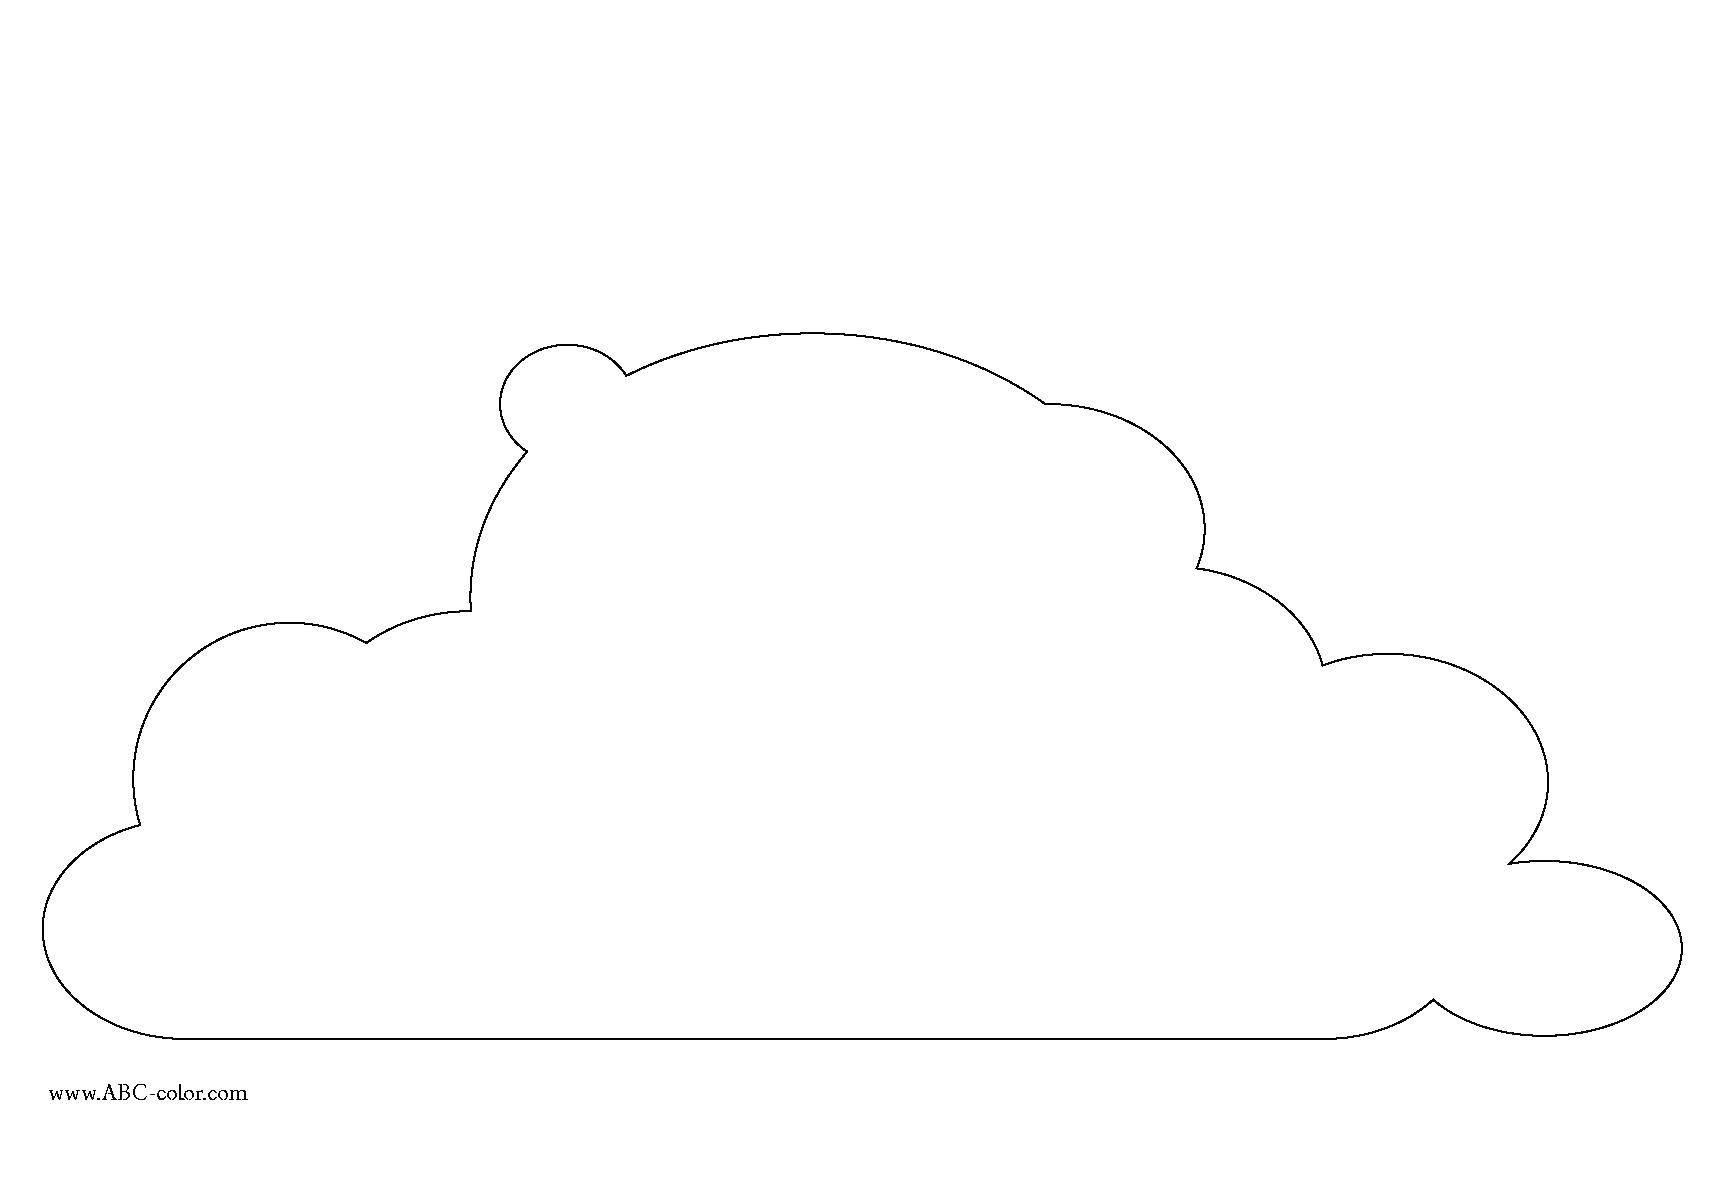 Coloring The outline of the clouds. Category cloud. Tags:  cloud, contour.